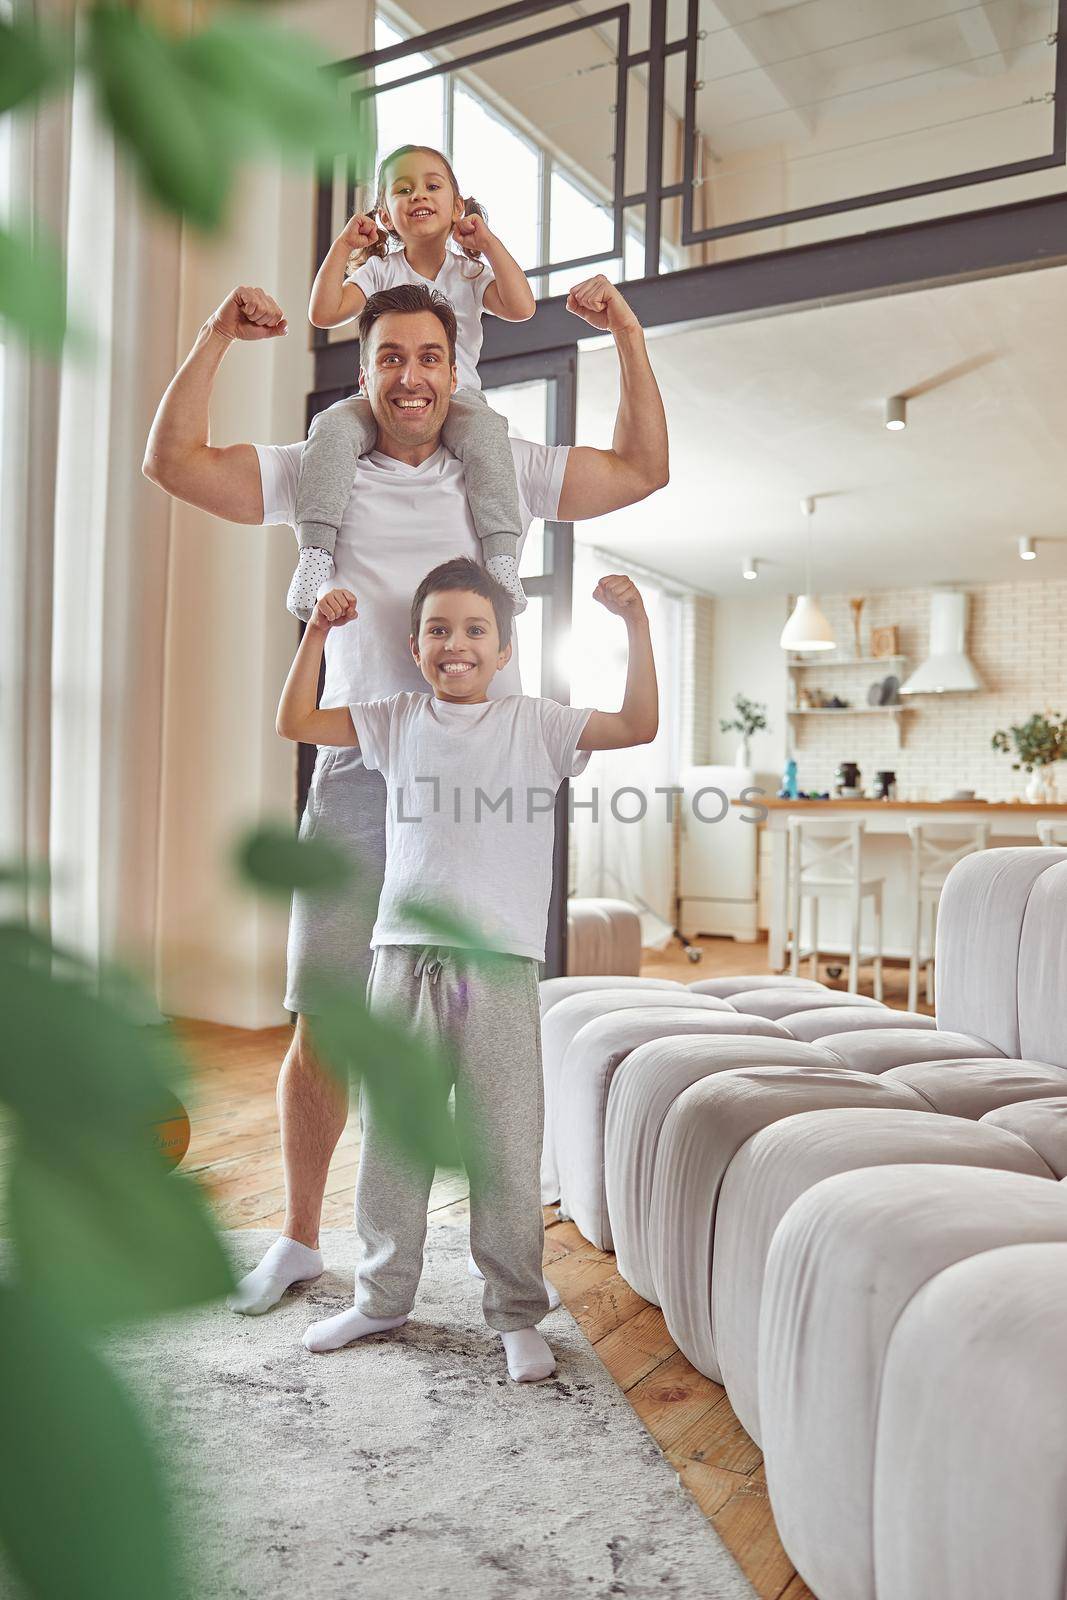 Full length portrait of cheerful man standing with son and daughter in living room and showing muscles